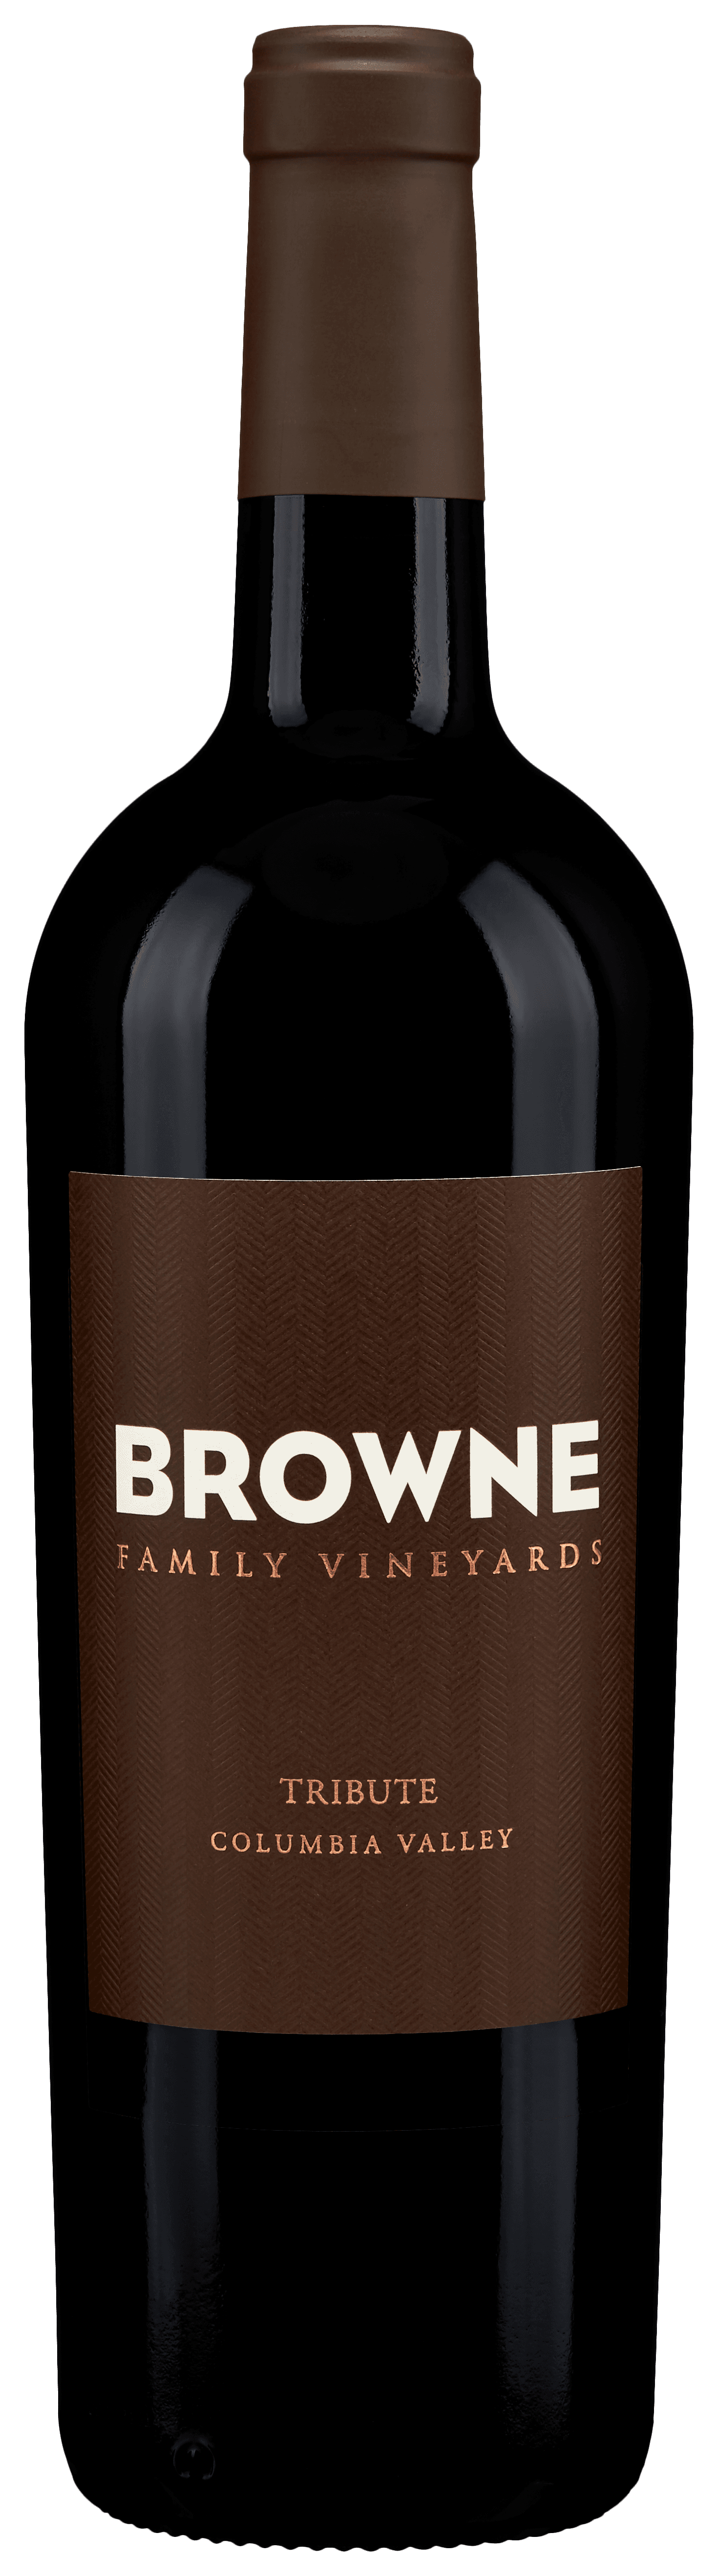 Browne Family Vineyards 'Tribute' Columbia Valley Red Blend